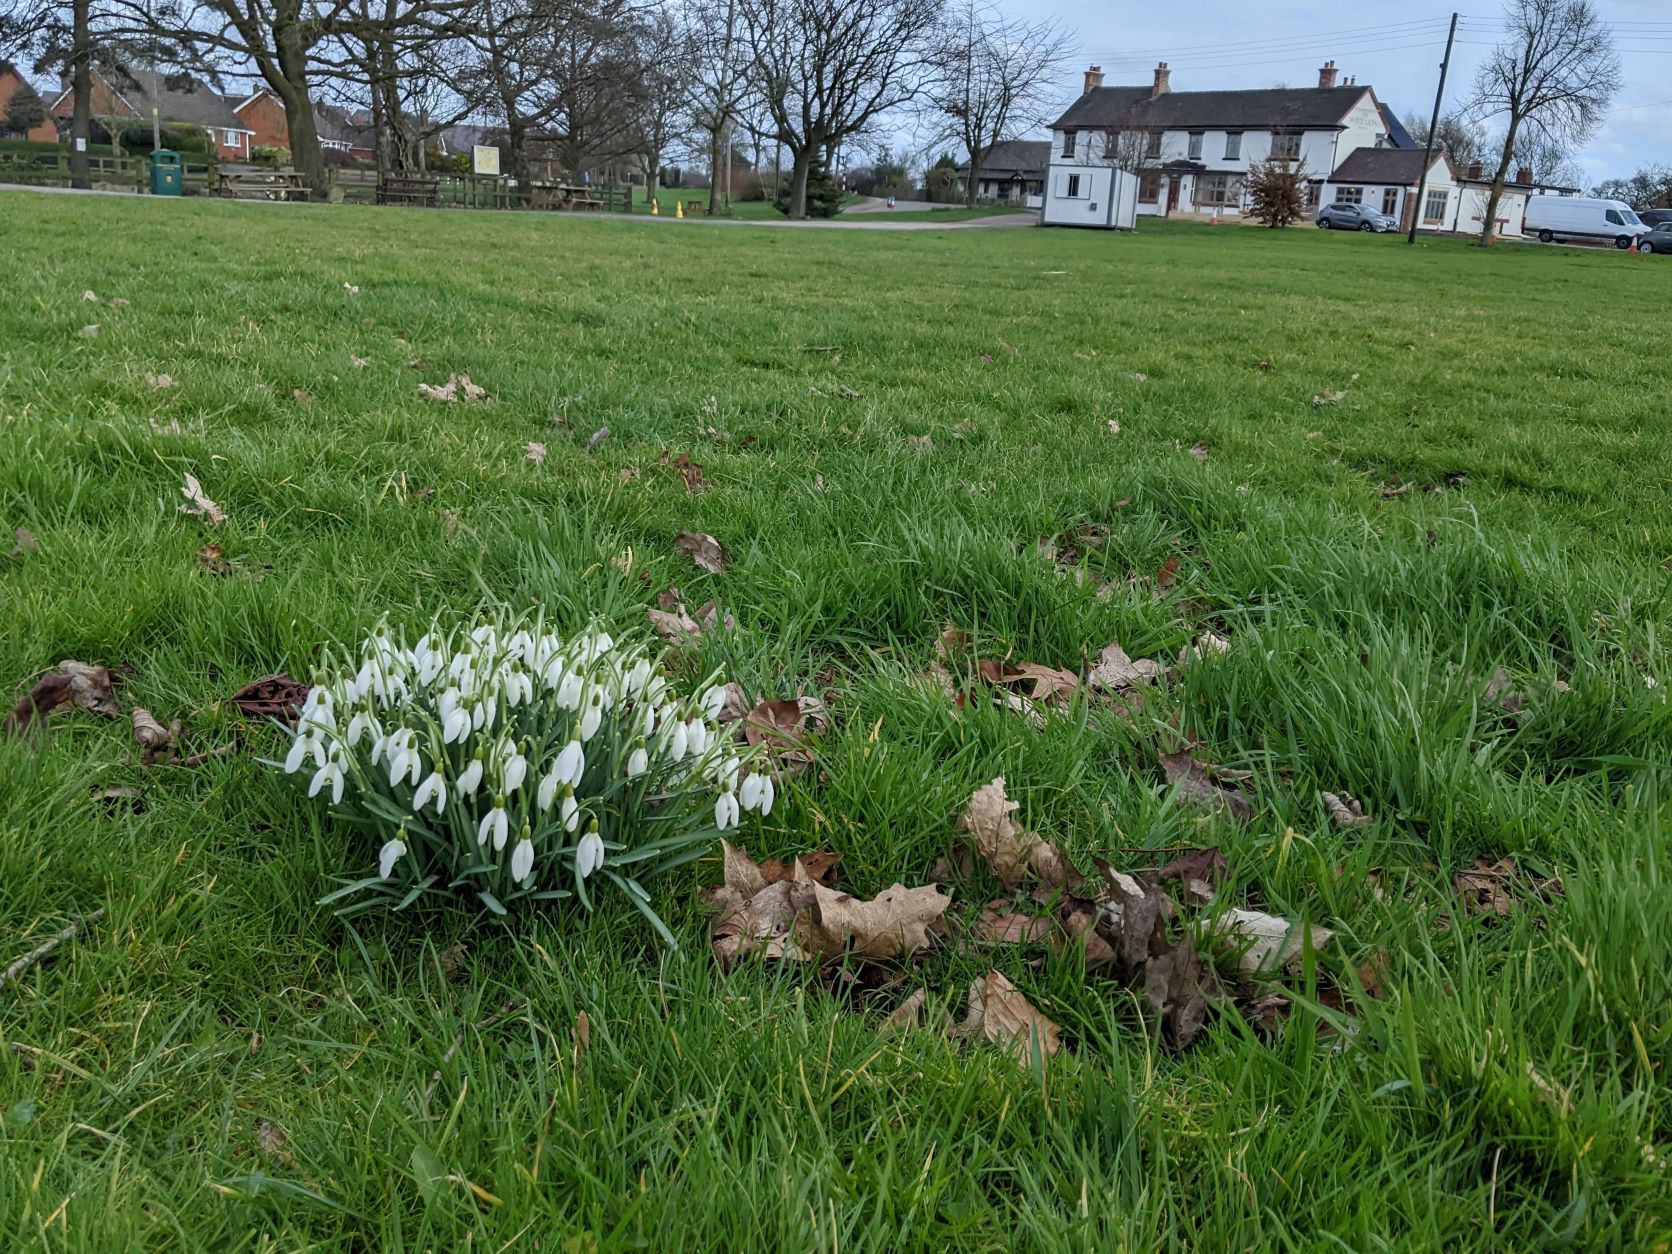 Snowdrops on the village green, February 26th